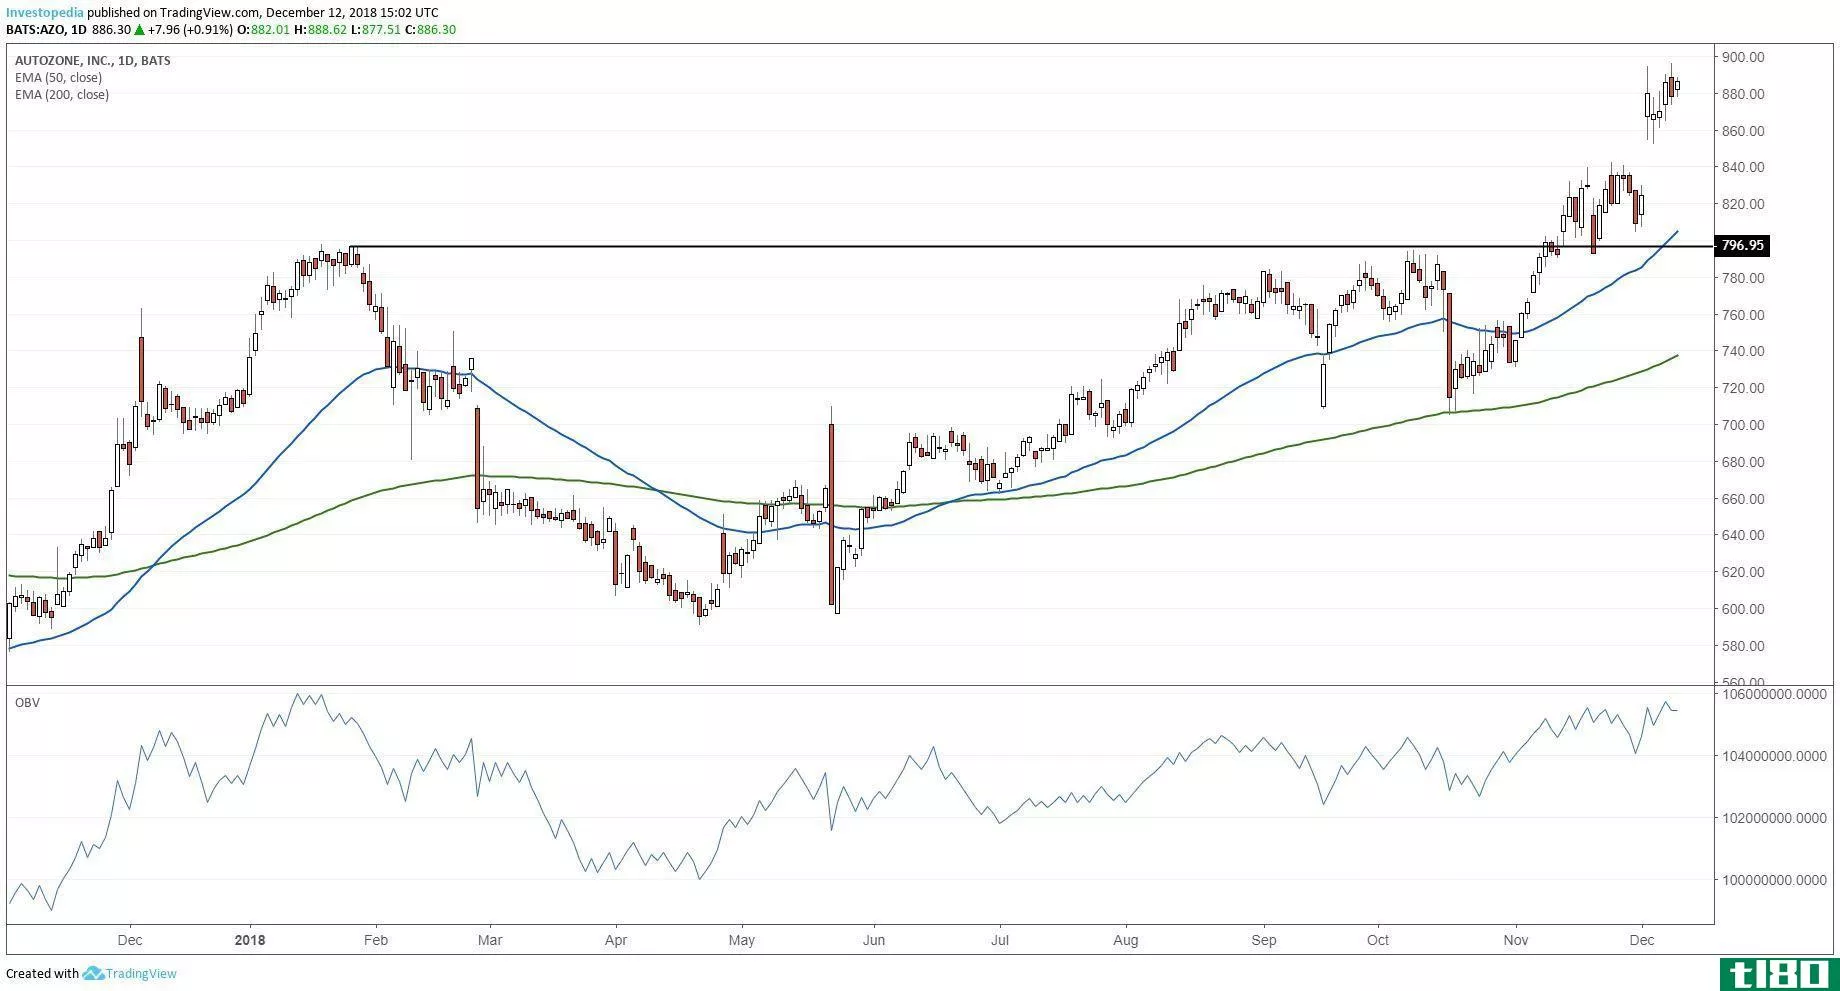 Technical chart showing the performance of AutoZone, Inc. (AZO) stock